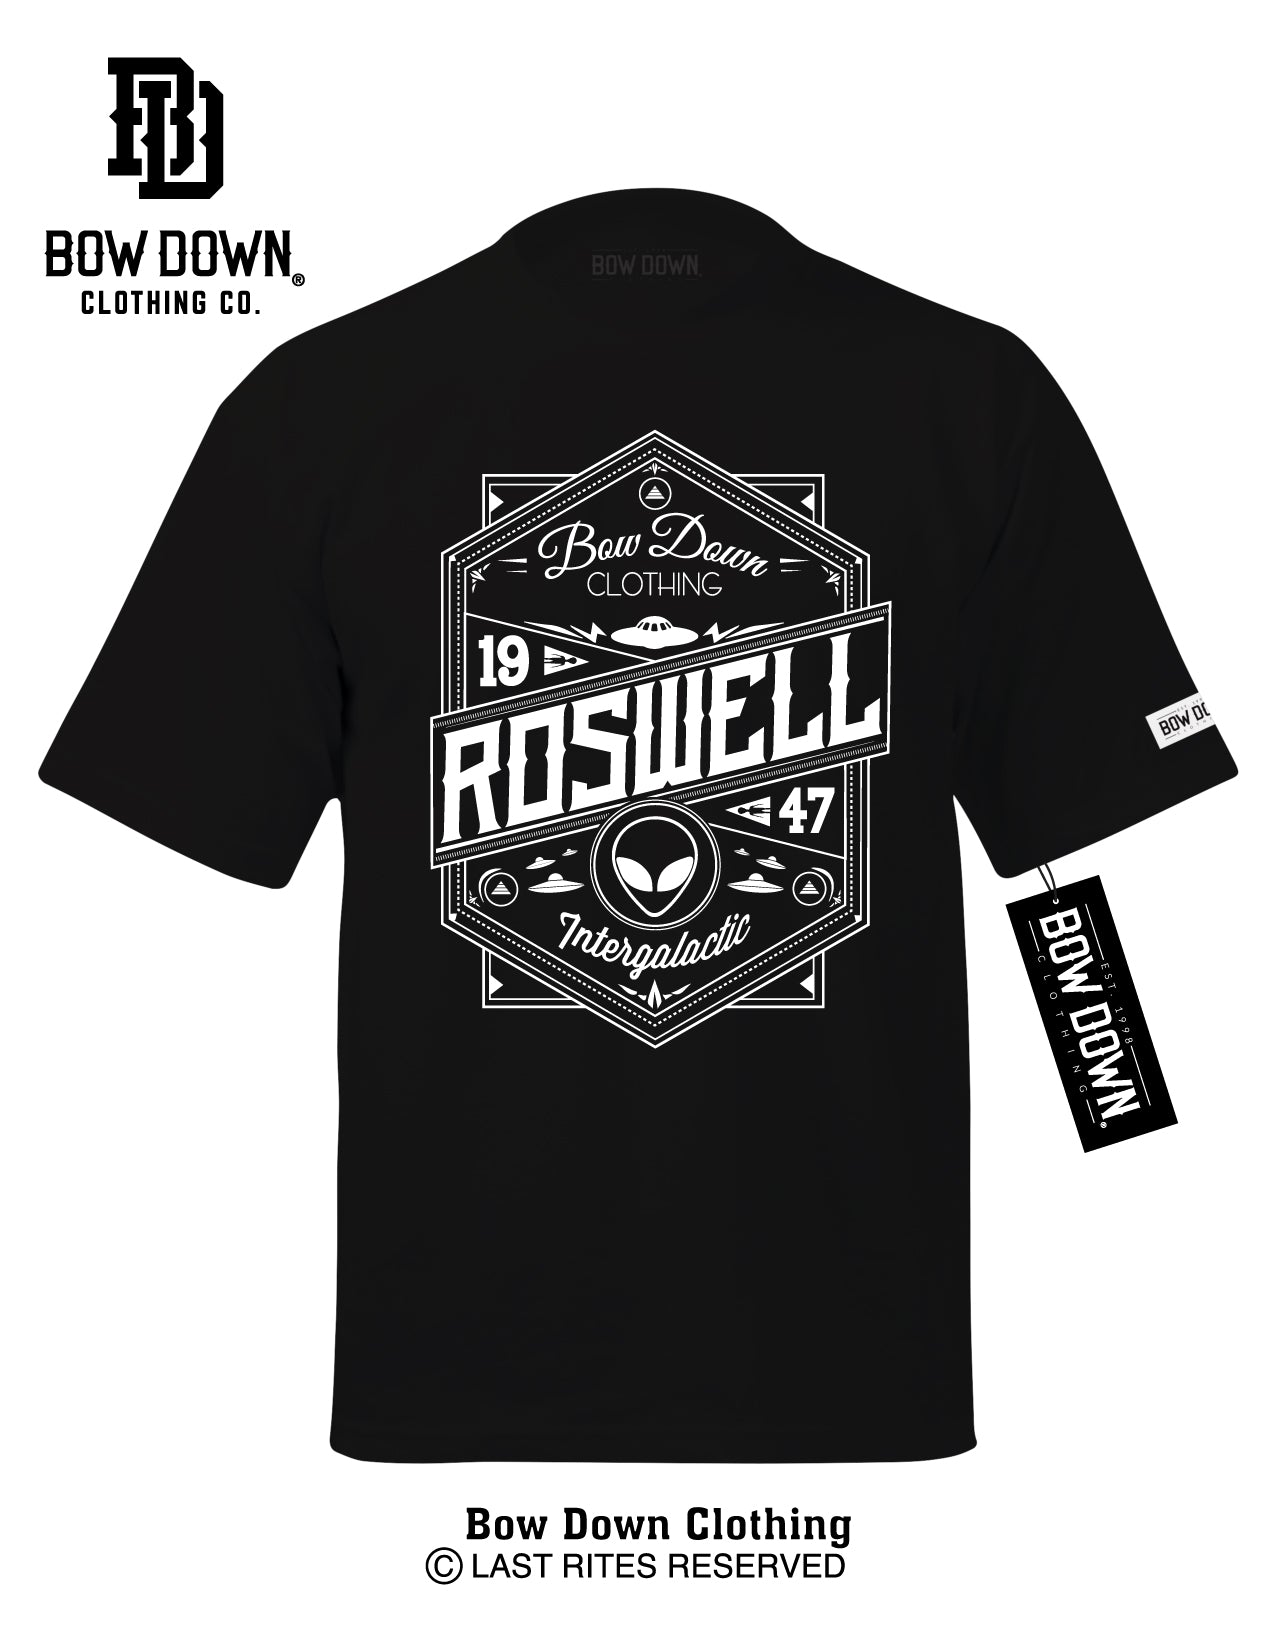 ROSWELL CROWN